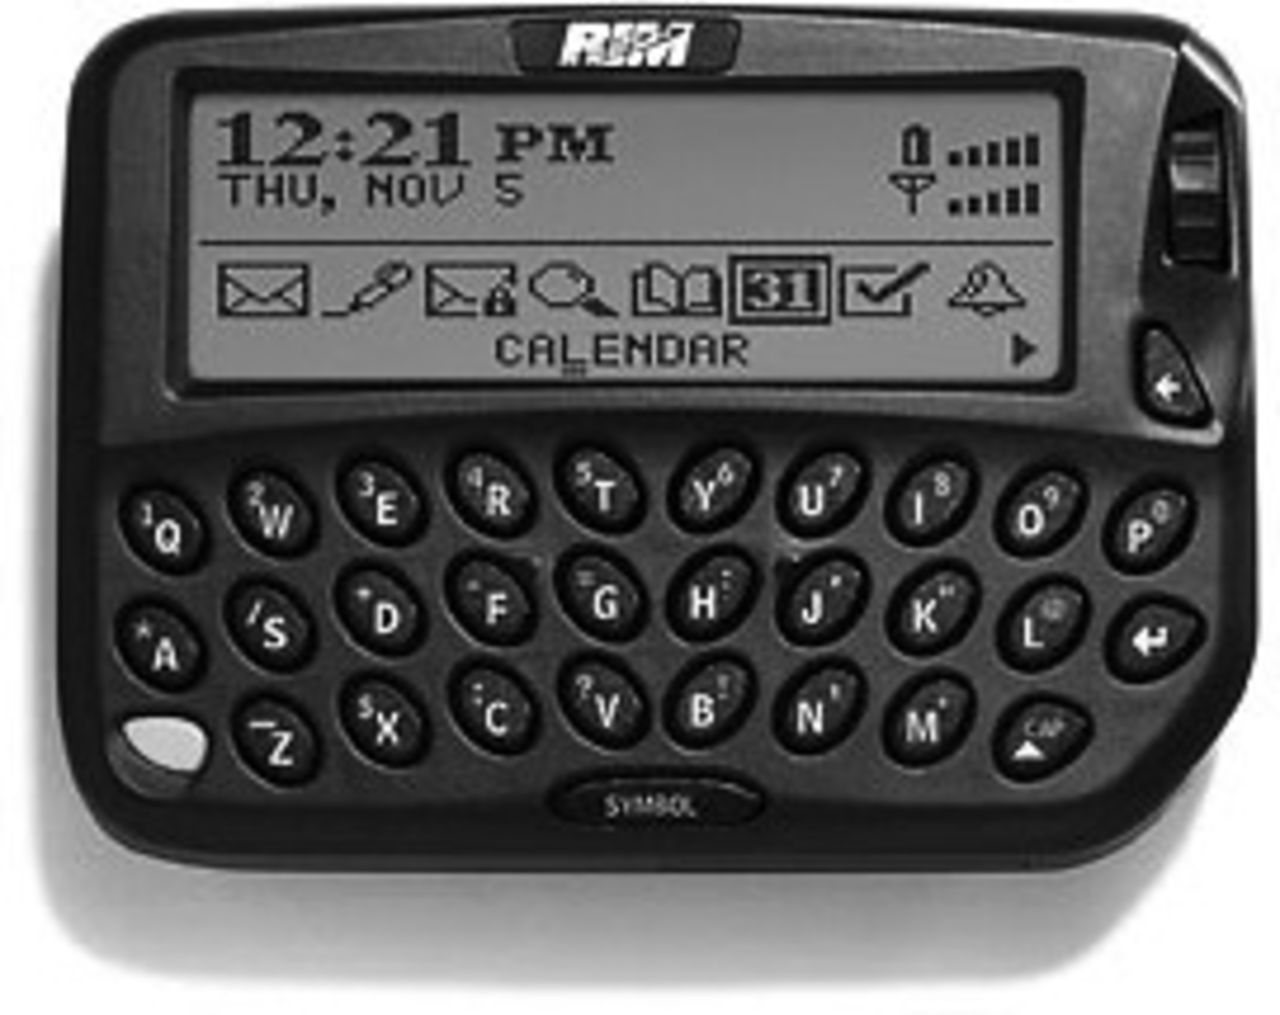 People slapped these suckers on their hips, feeling important whenever they beeped or vibrated. Then they'd frantically have to find a few coins to use a payphone. The RIM 850 (before it was called BlackBerry) pager could send messages and emails but never nailed the art of the selfie.